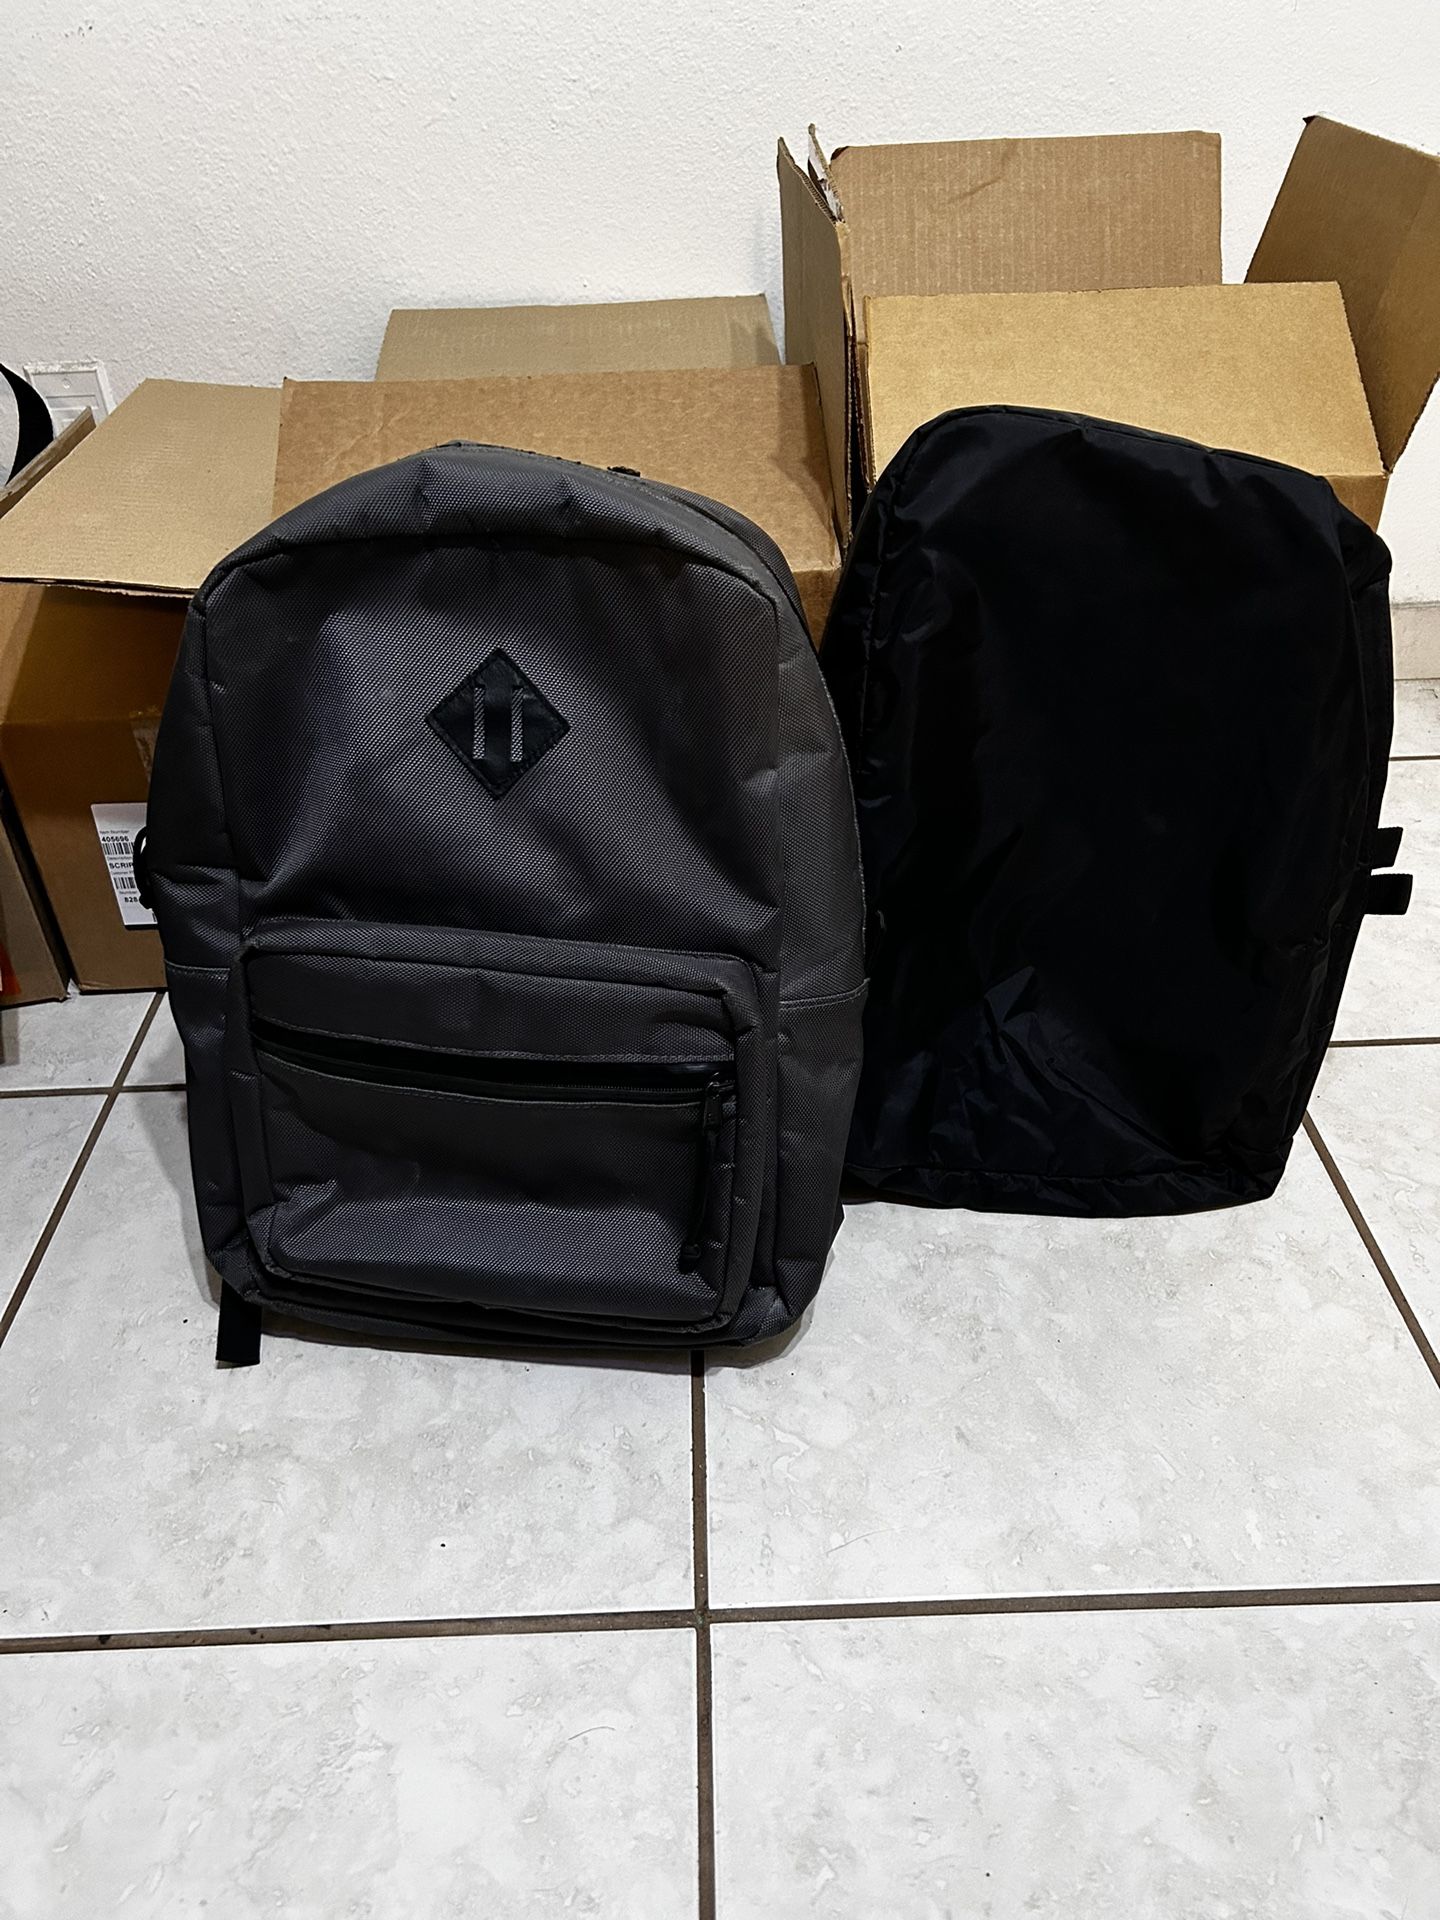 Smell Proof Backpack with Insert Bag